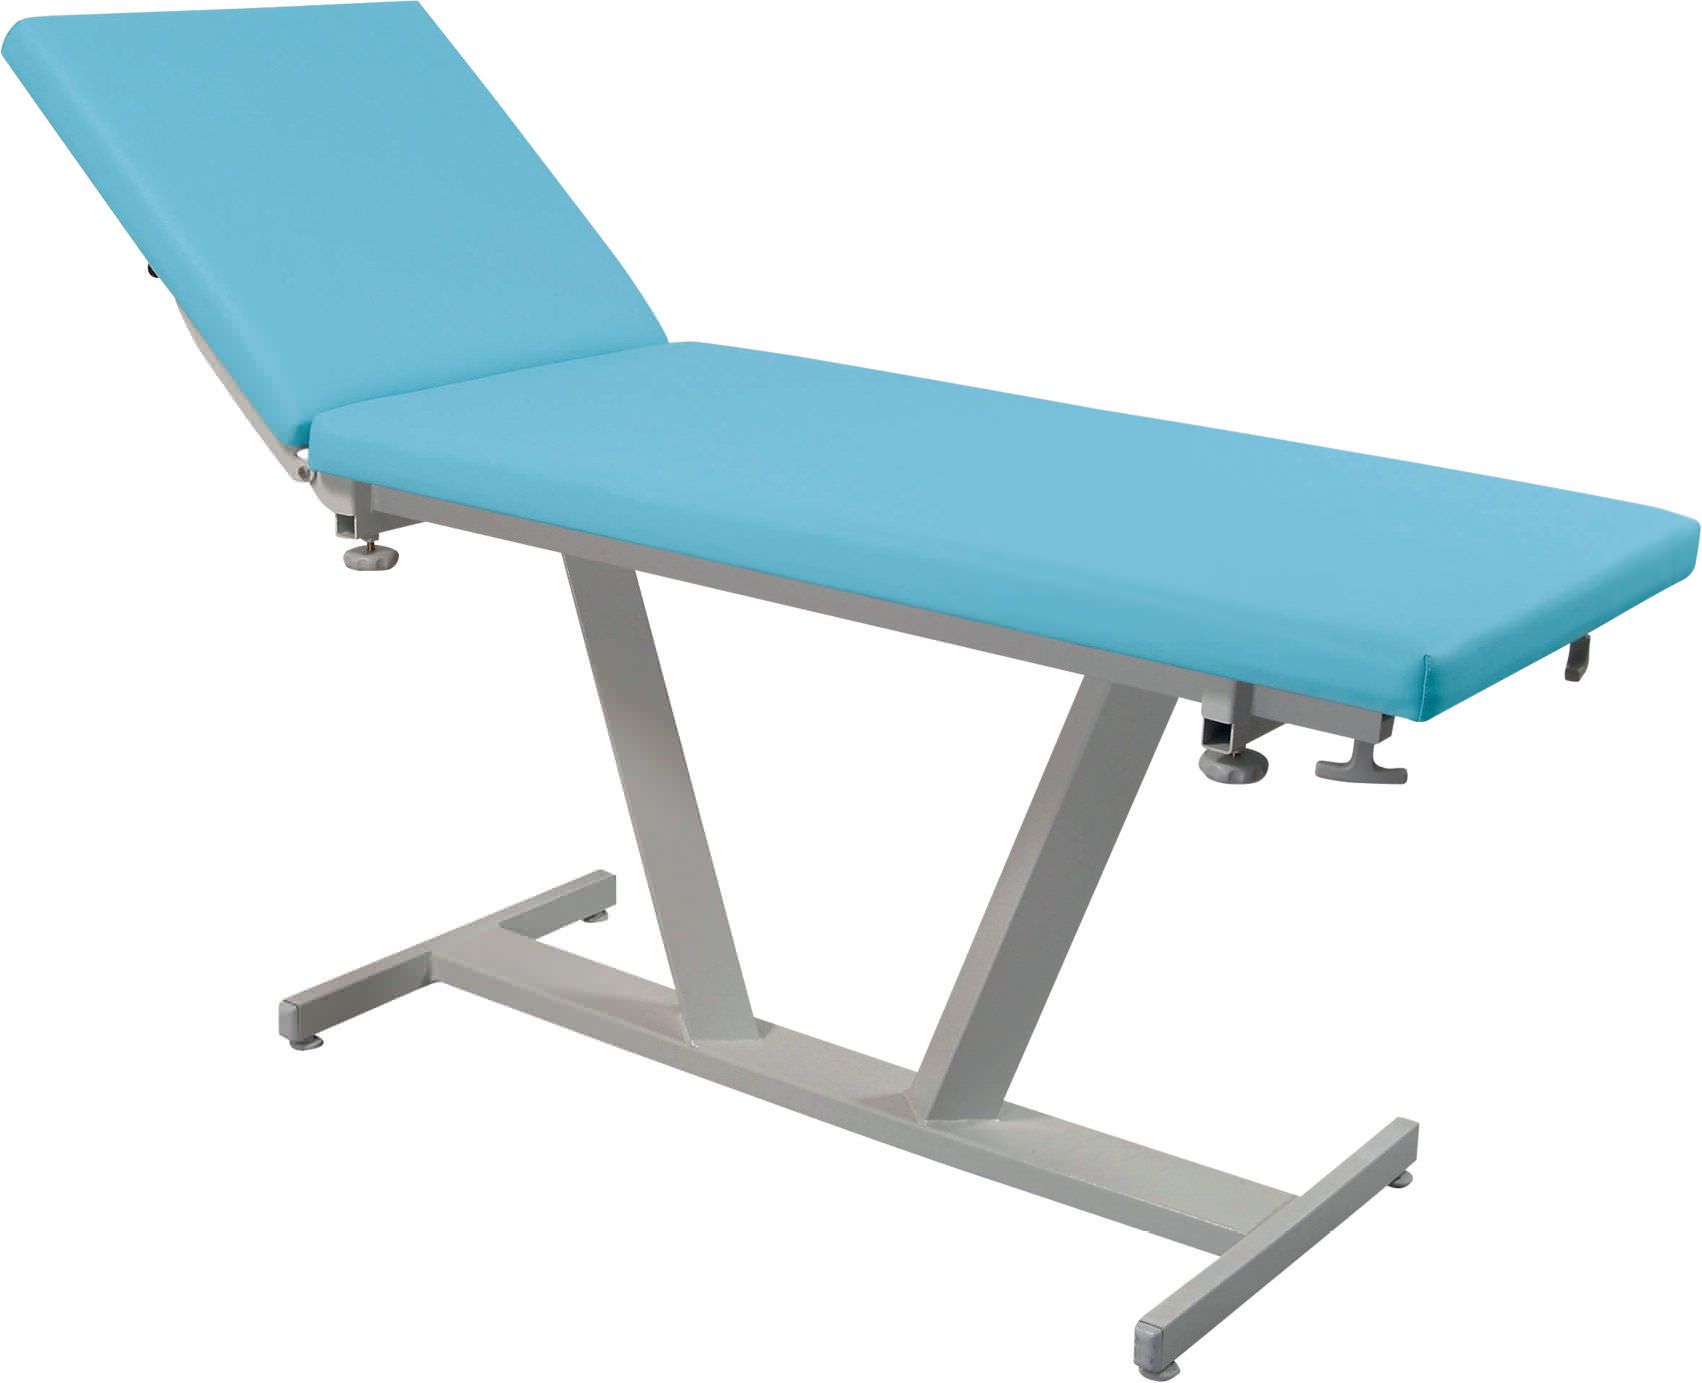 Fixed examination table / 2-section 200 kg | FIDJI 10110-10 Promotal